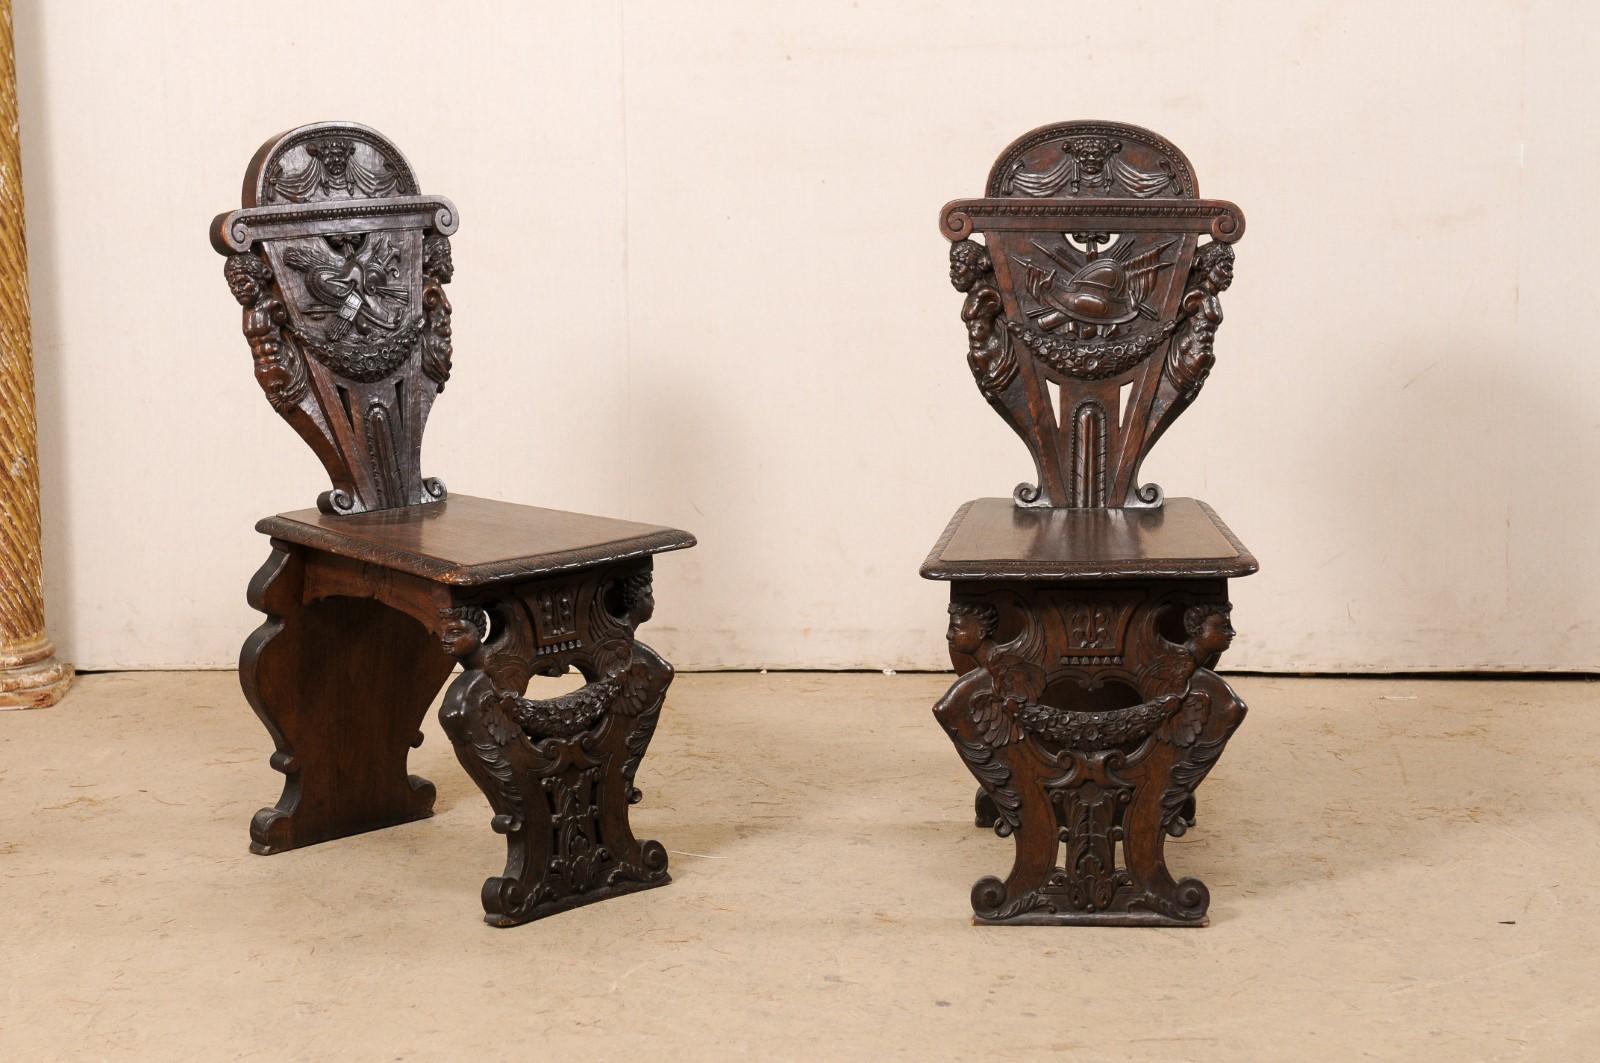 An English set of six Renaissance style elaborately carved hall chairs from the turn of the 19th and 20th century. This set of antique board chairs from England each have been ornately hand-carved in a series of grotesque figures, embellished with